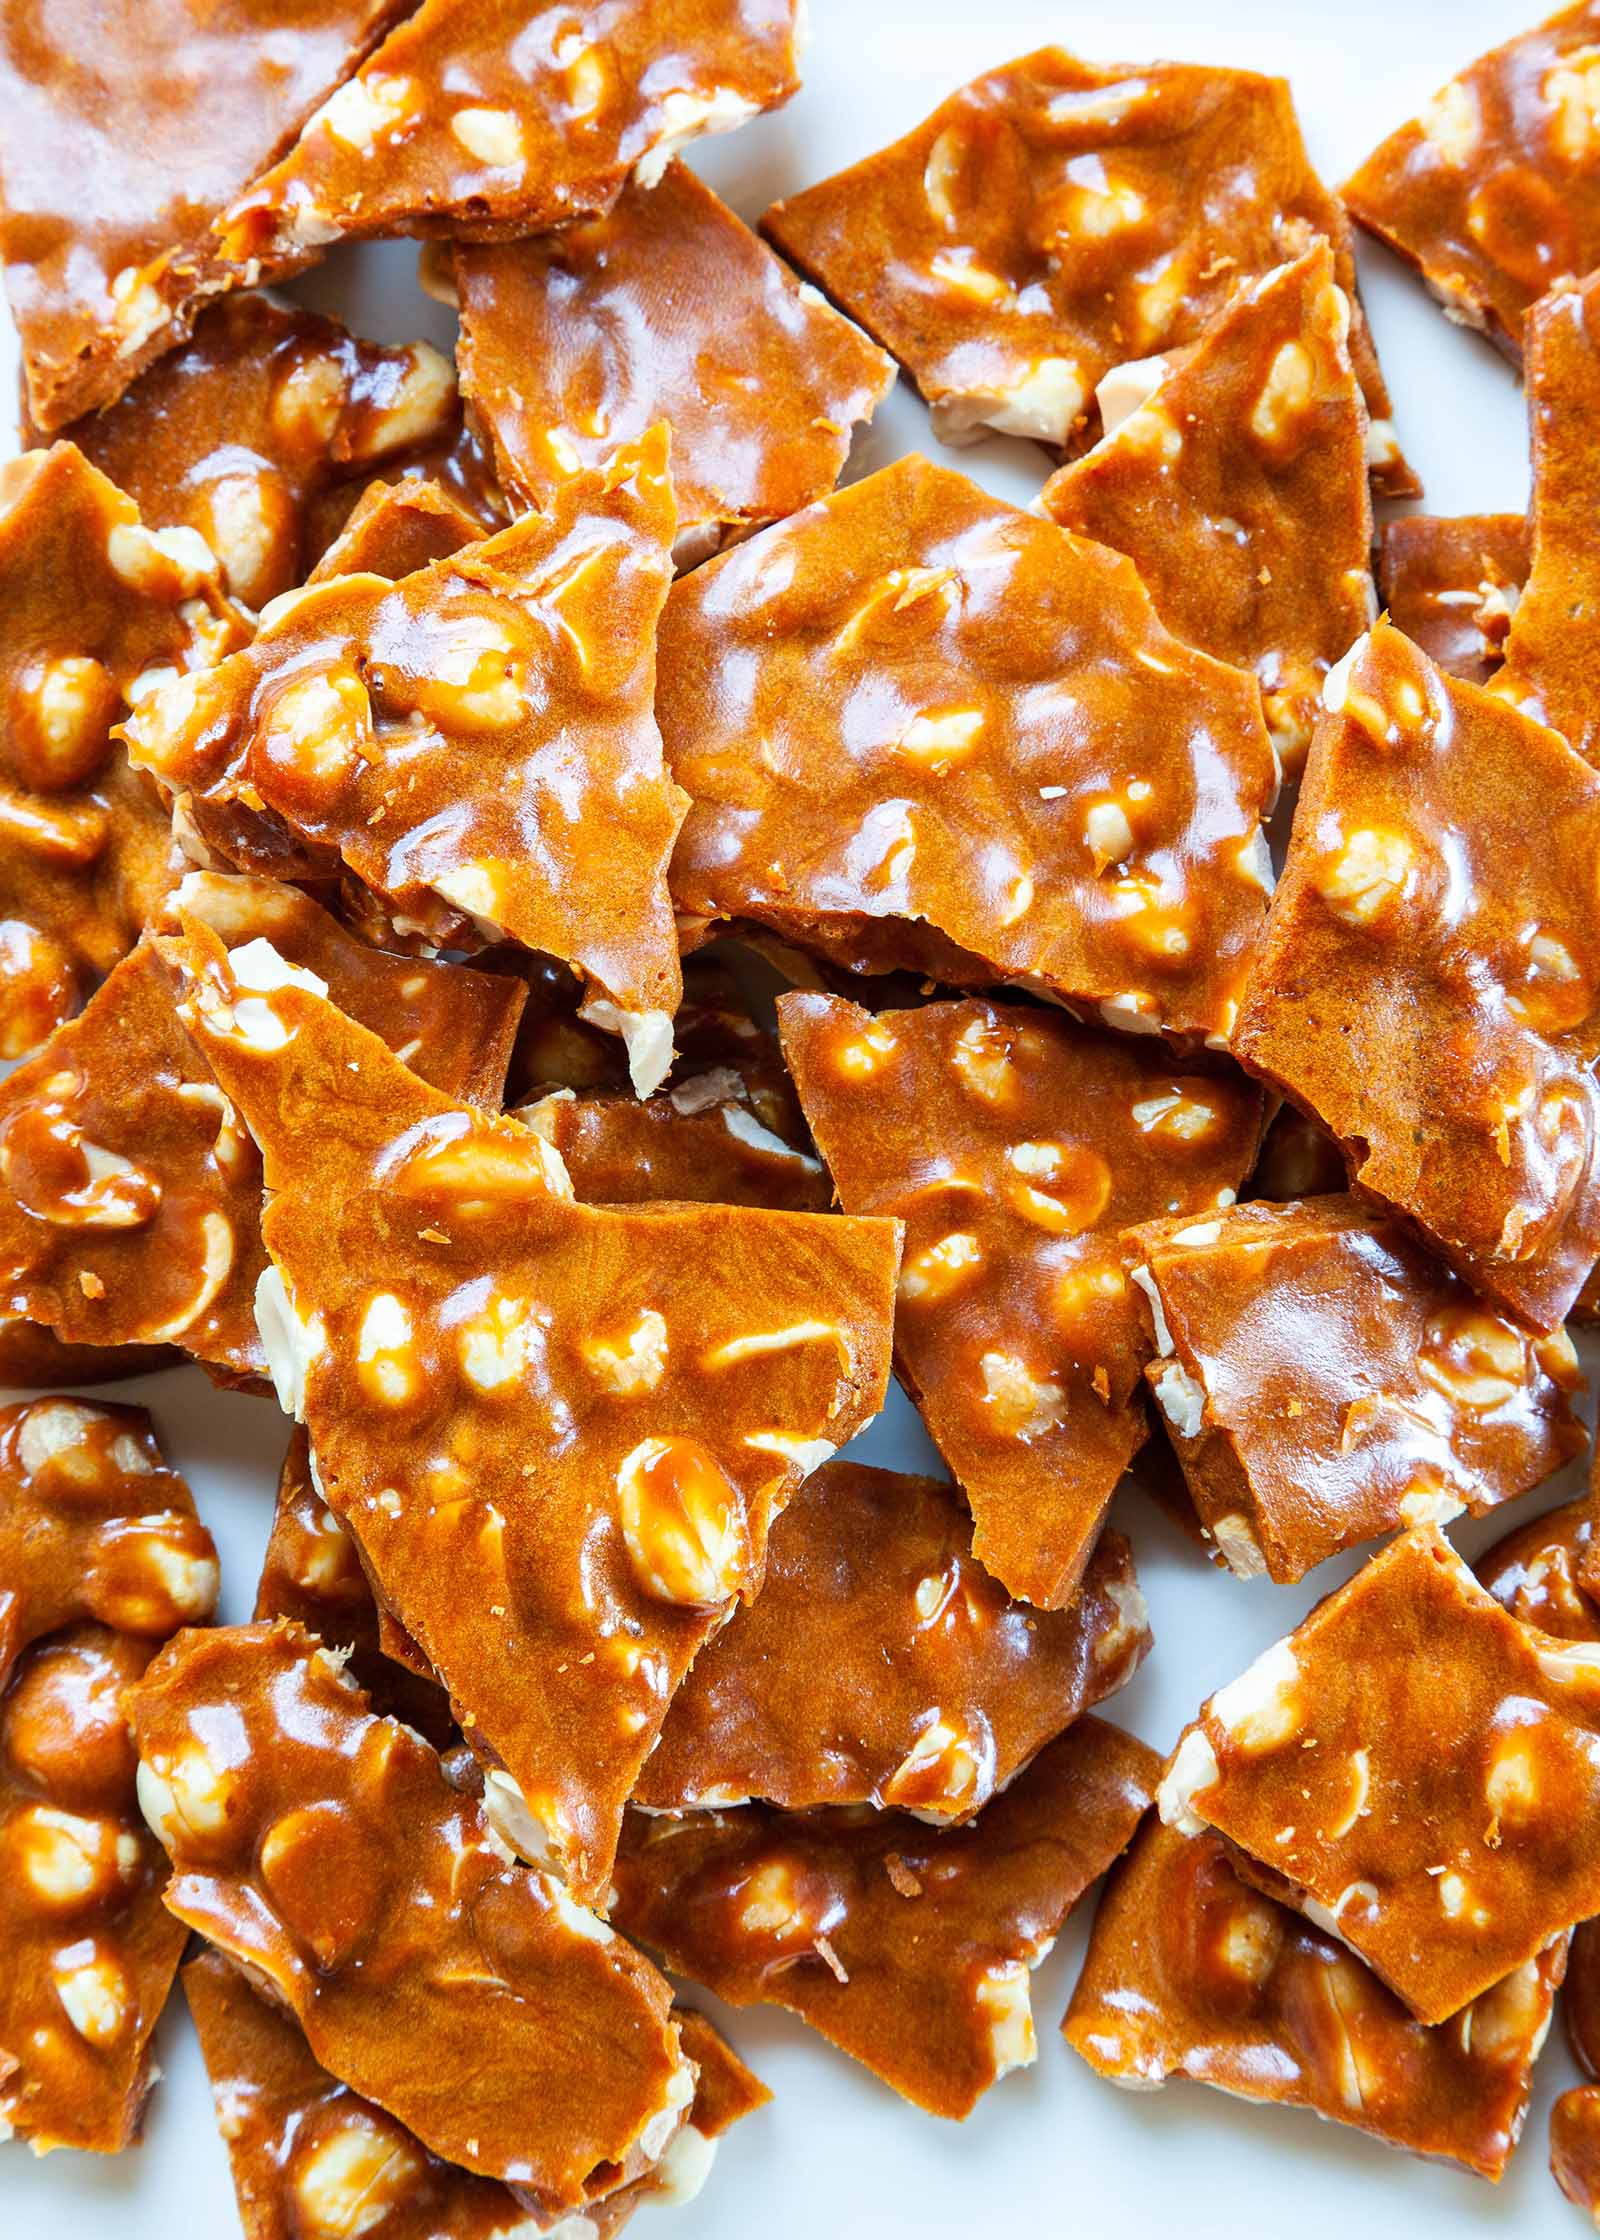 How to Make Peanut Brittle